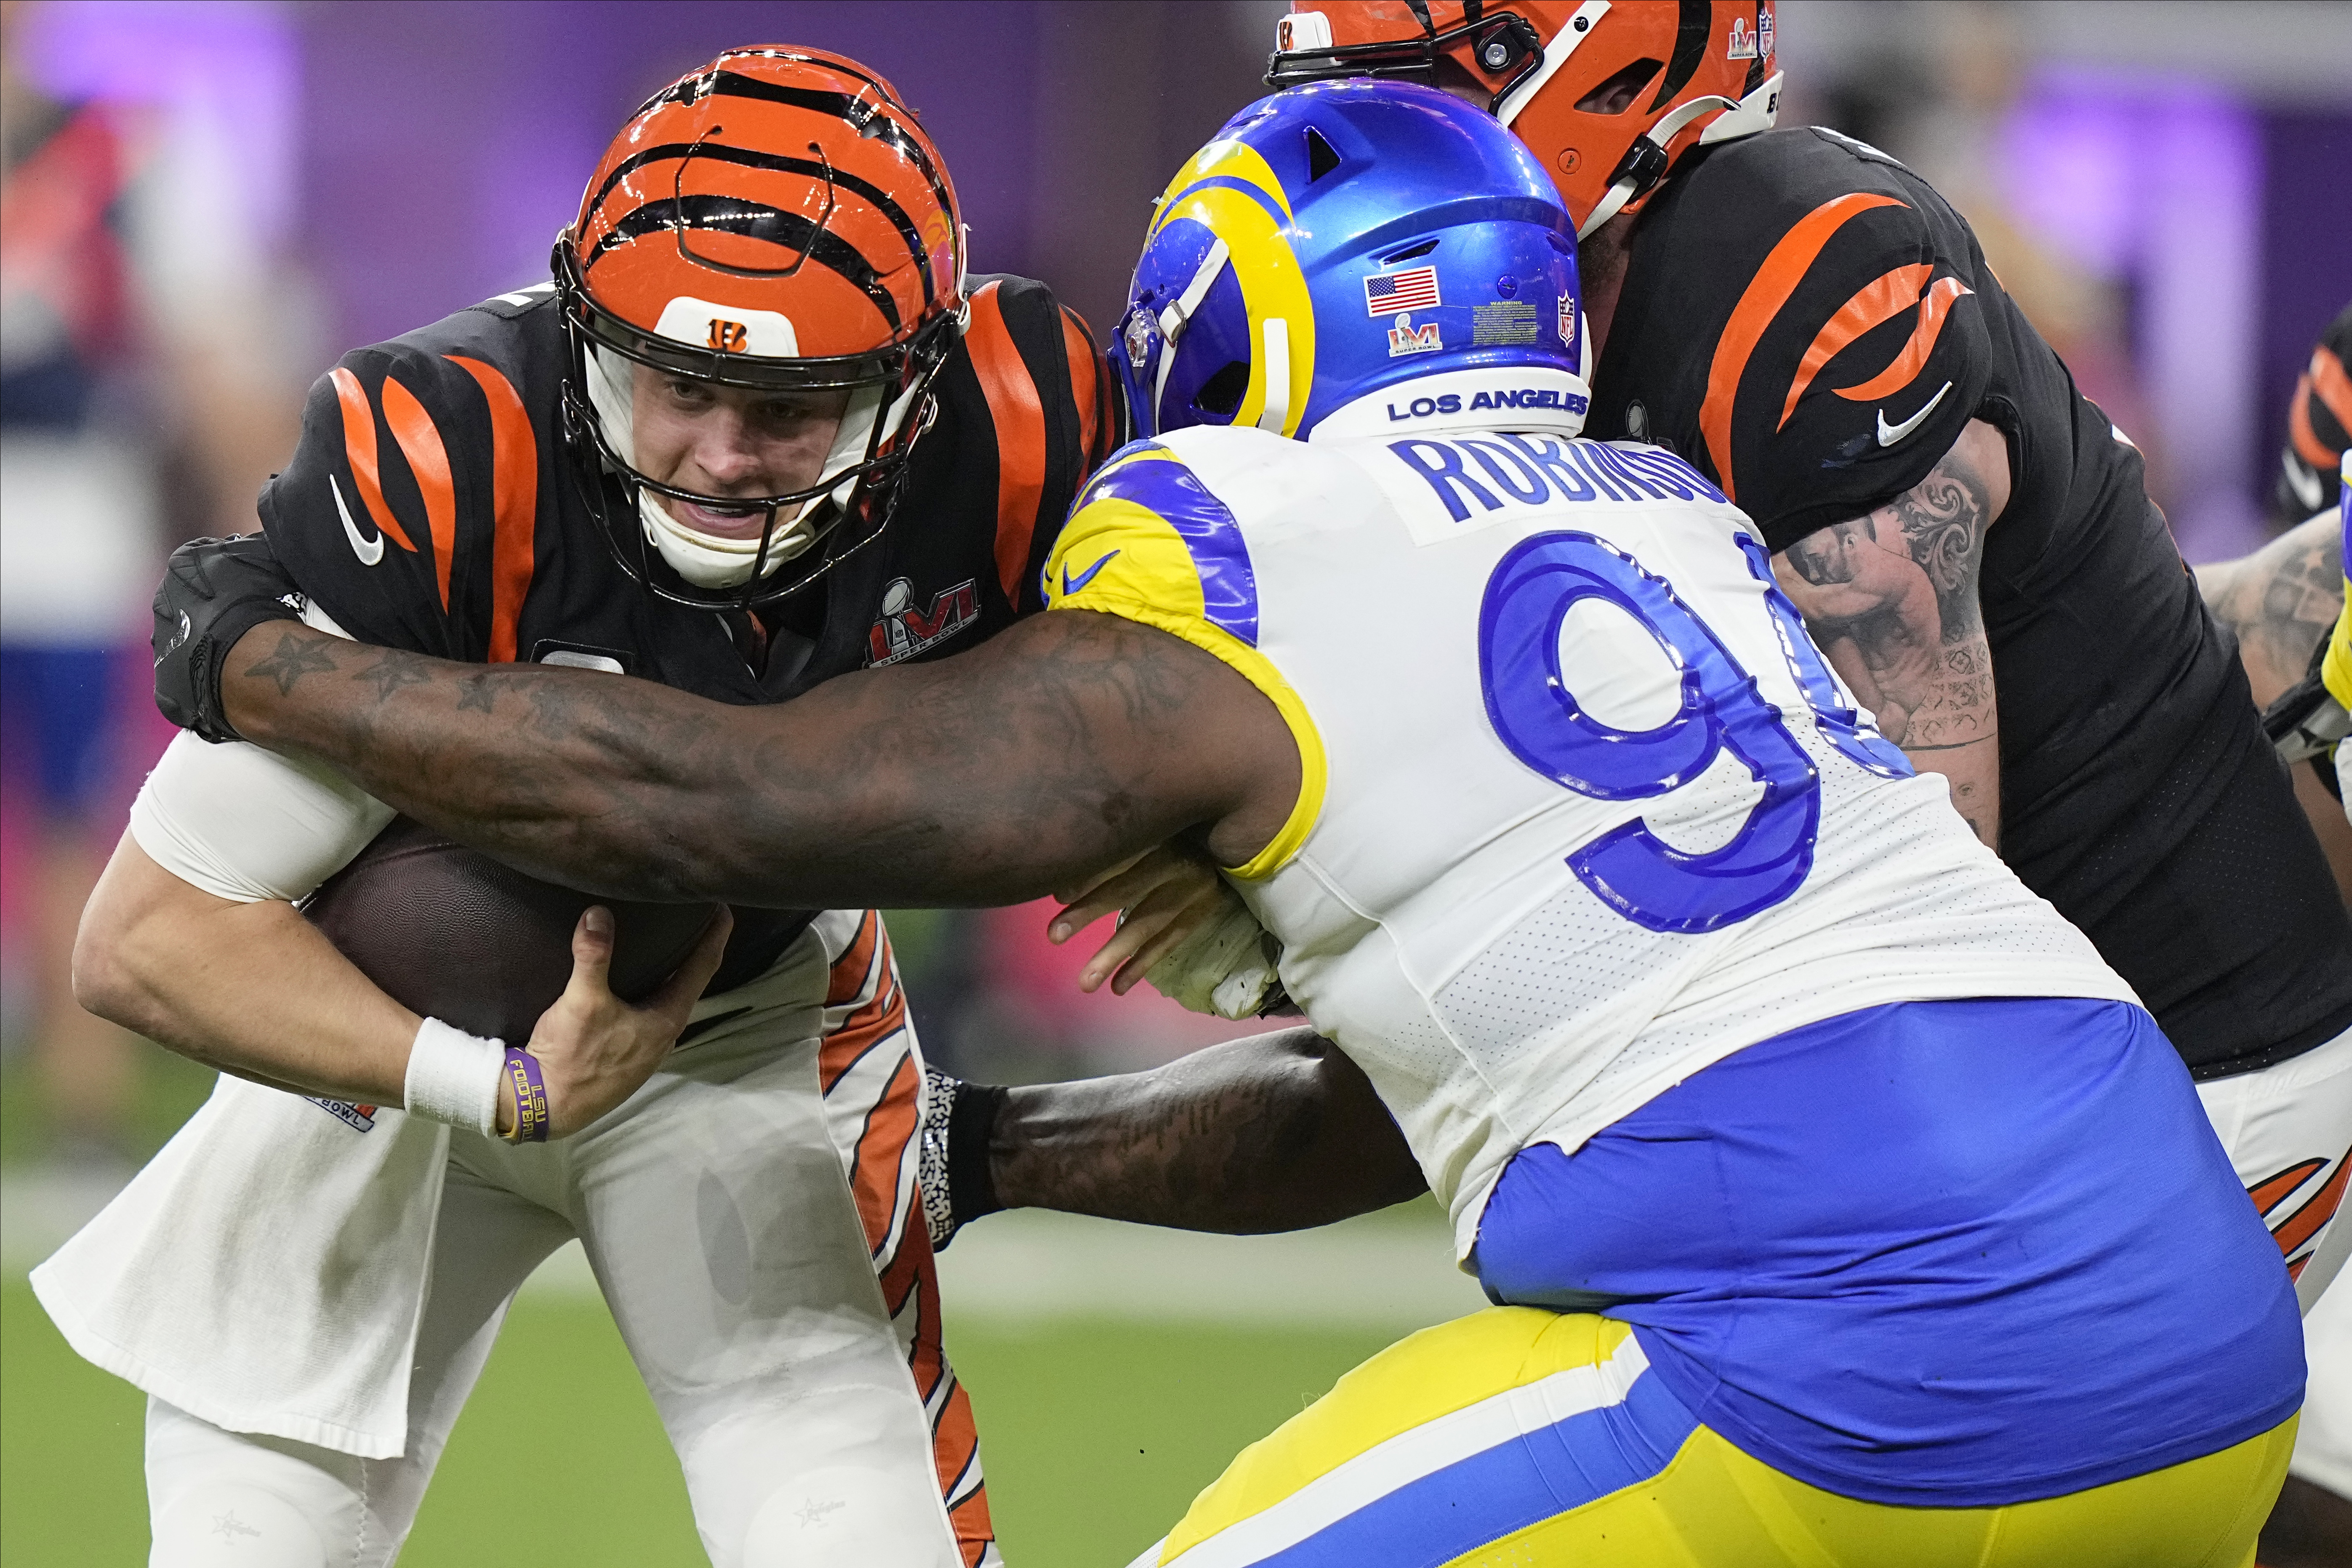 Super Bowl Live: Bengals take lead over Rams, 20-16